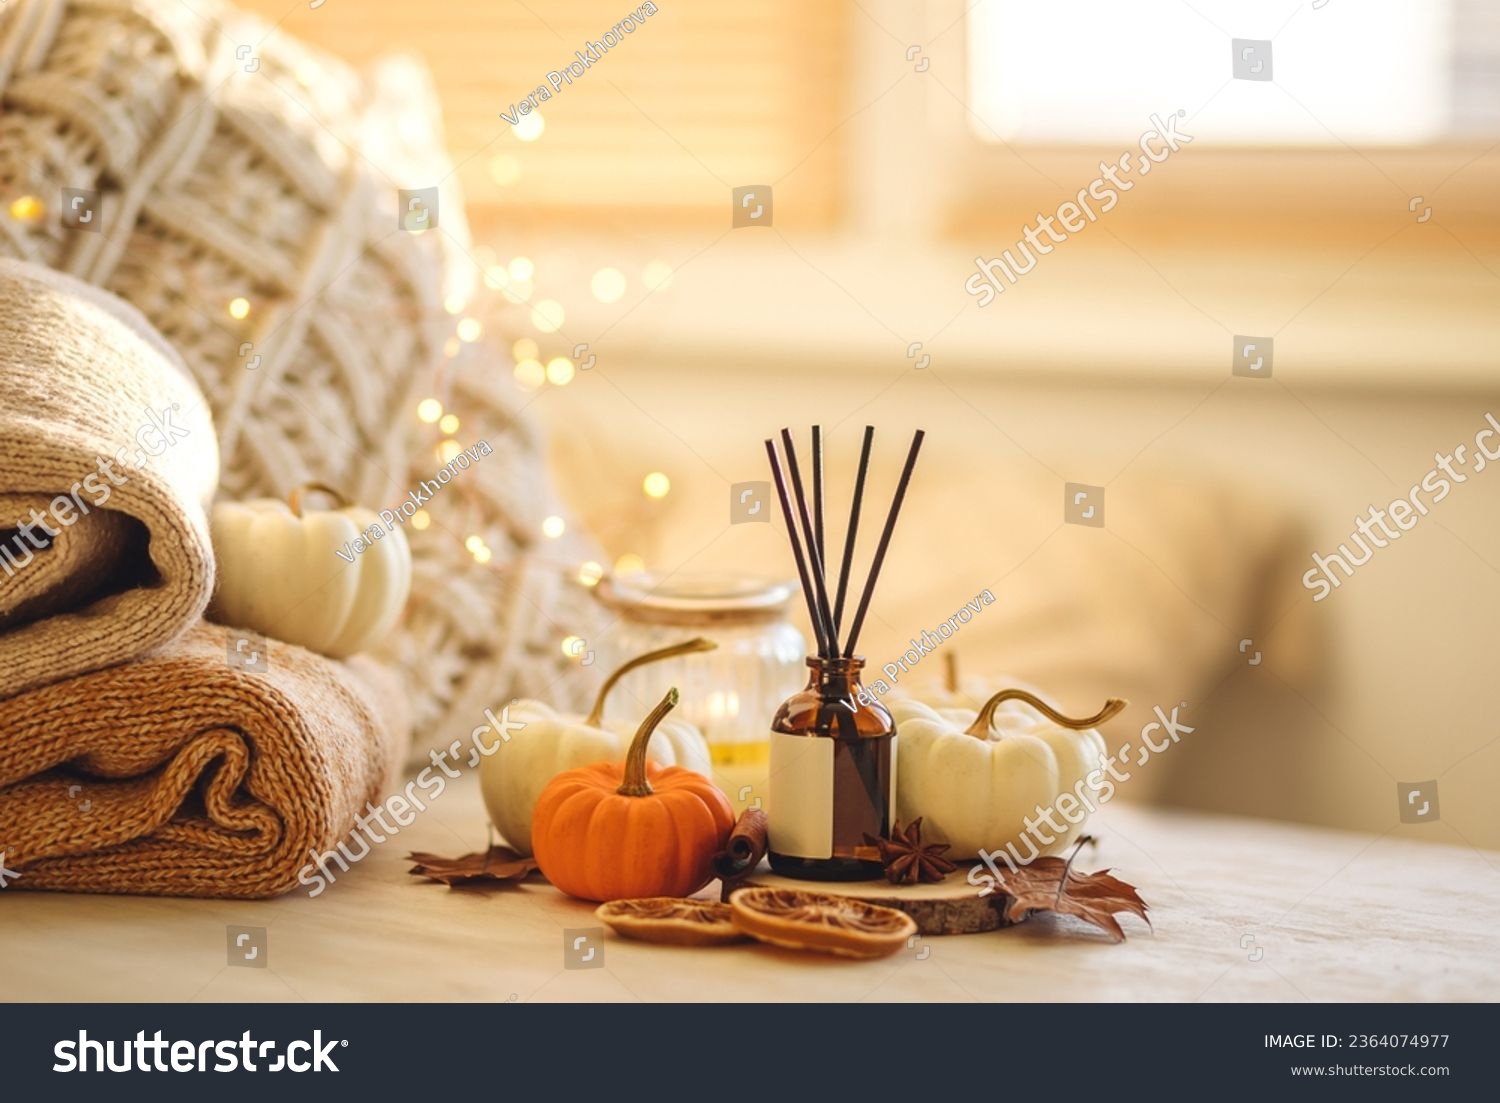 Autumn mood, cozy fall home atmosphere. Aroma diffuser, pumpkins, knitted warm sweaters, burning candles, dry leaves on wooden table. Concept of house decor, apartment seasonal fragrance. Thanksgiving #2364074977